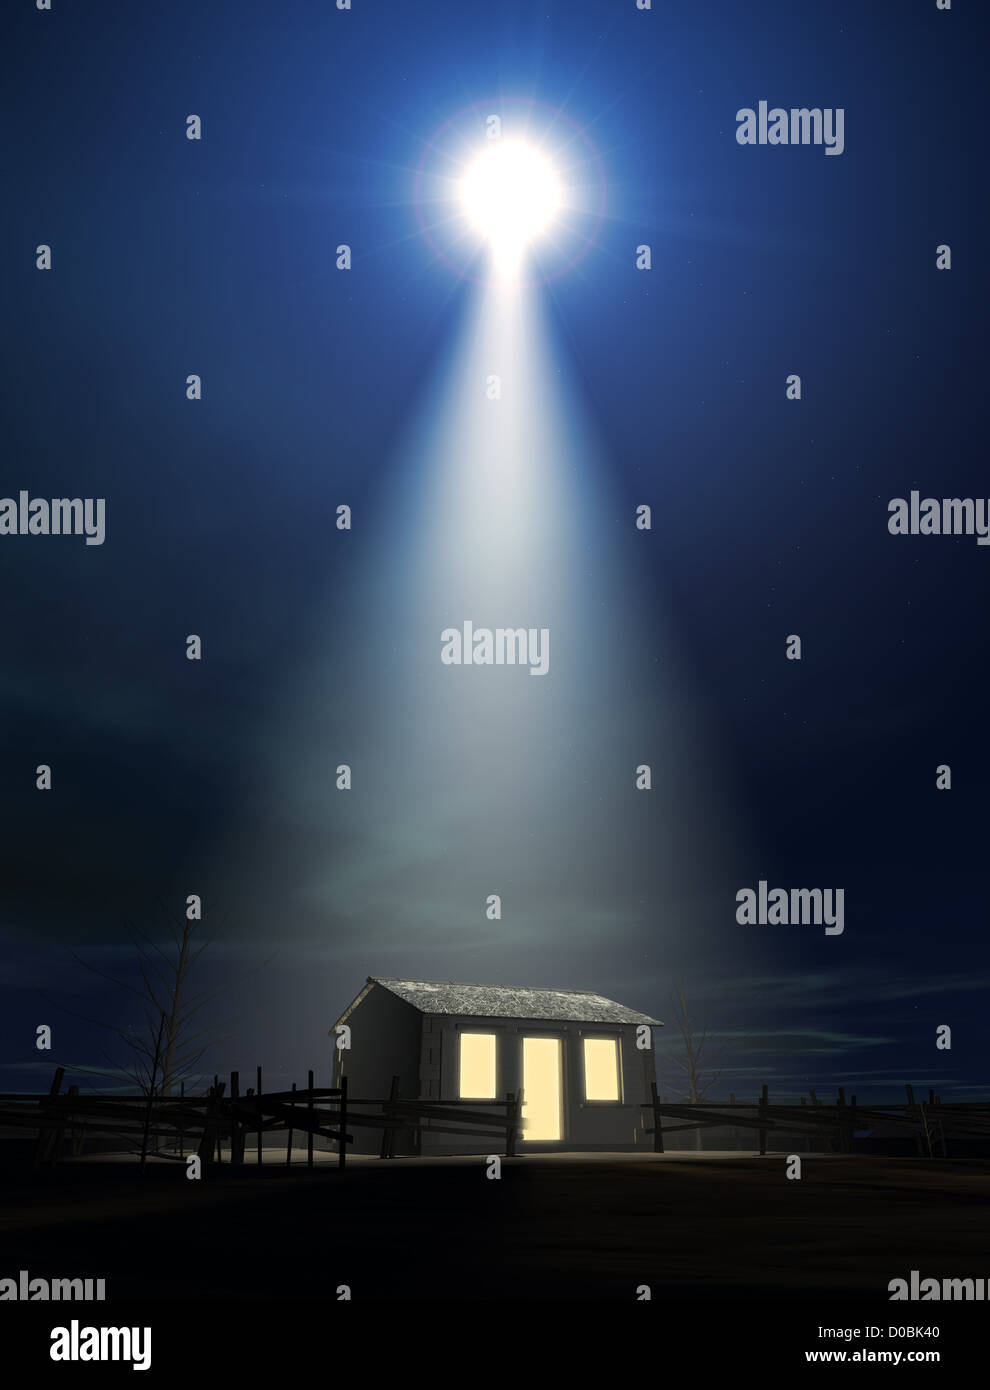 A depiction of the nativity scene of christs birth in bethlehem with the isolated run down stable being lit by a bright star Stock Photo